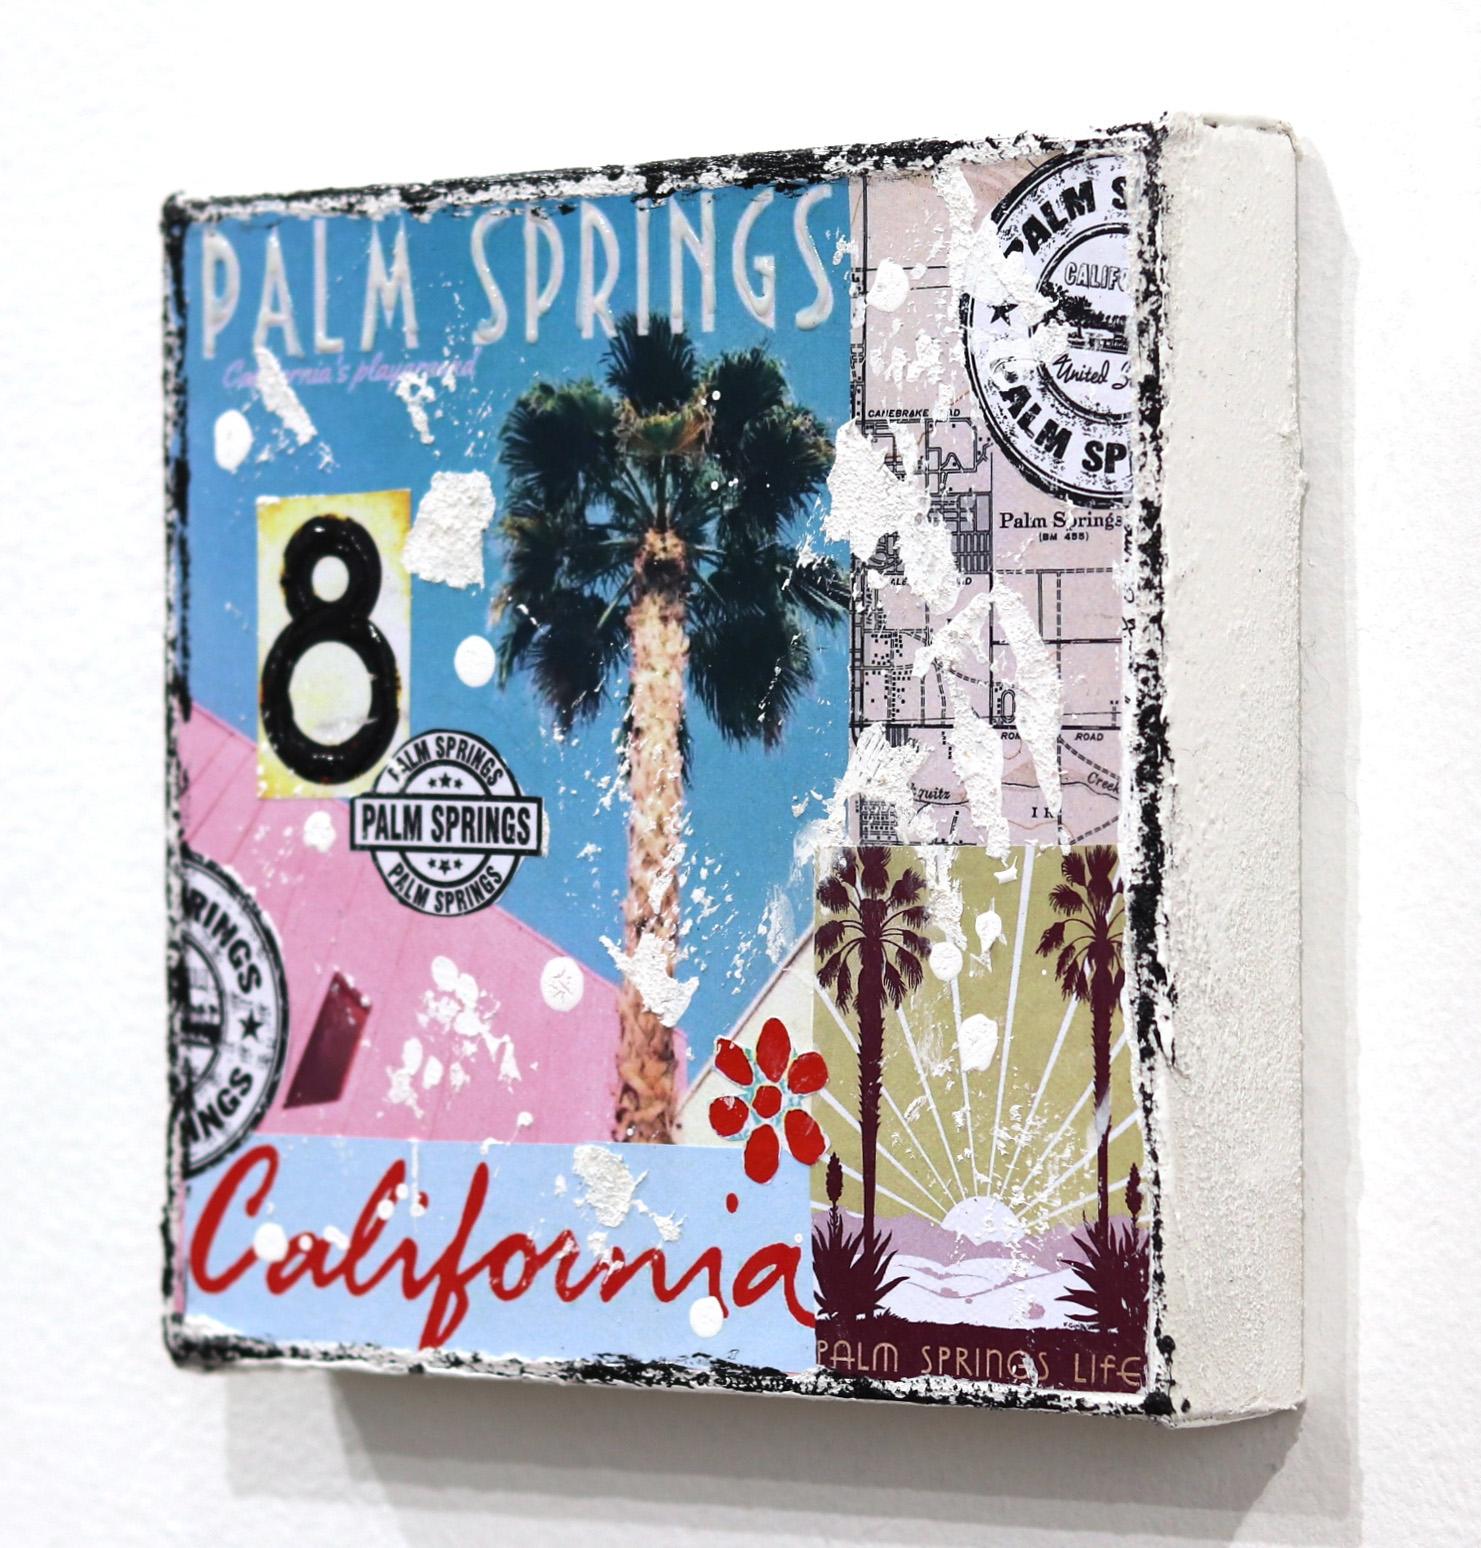 The Beautiful Palm Springs - Pop Art Mixed Media Art by Marion Duschletta